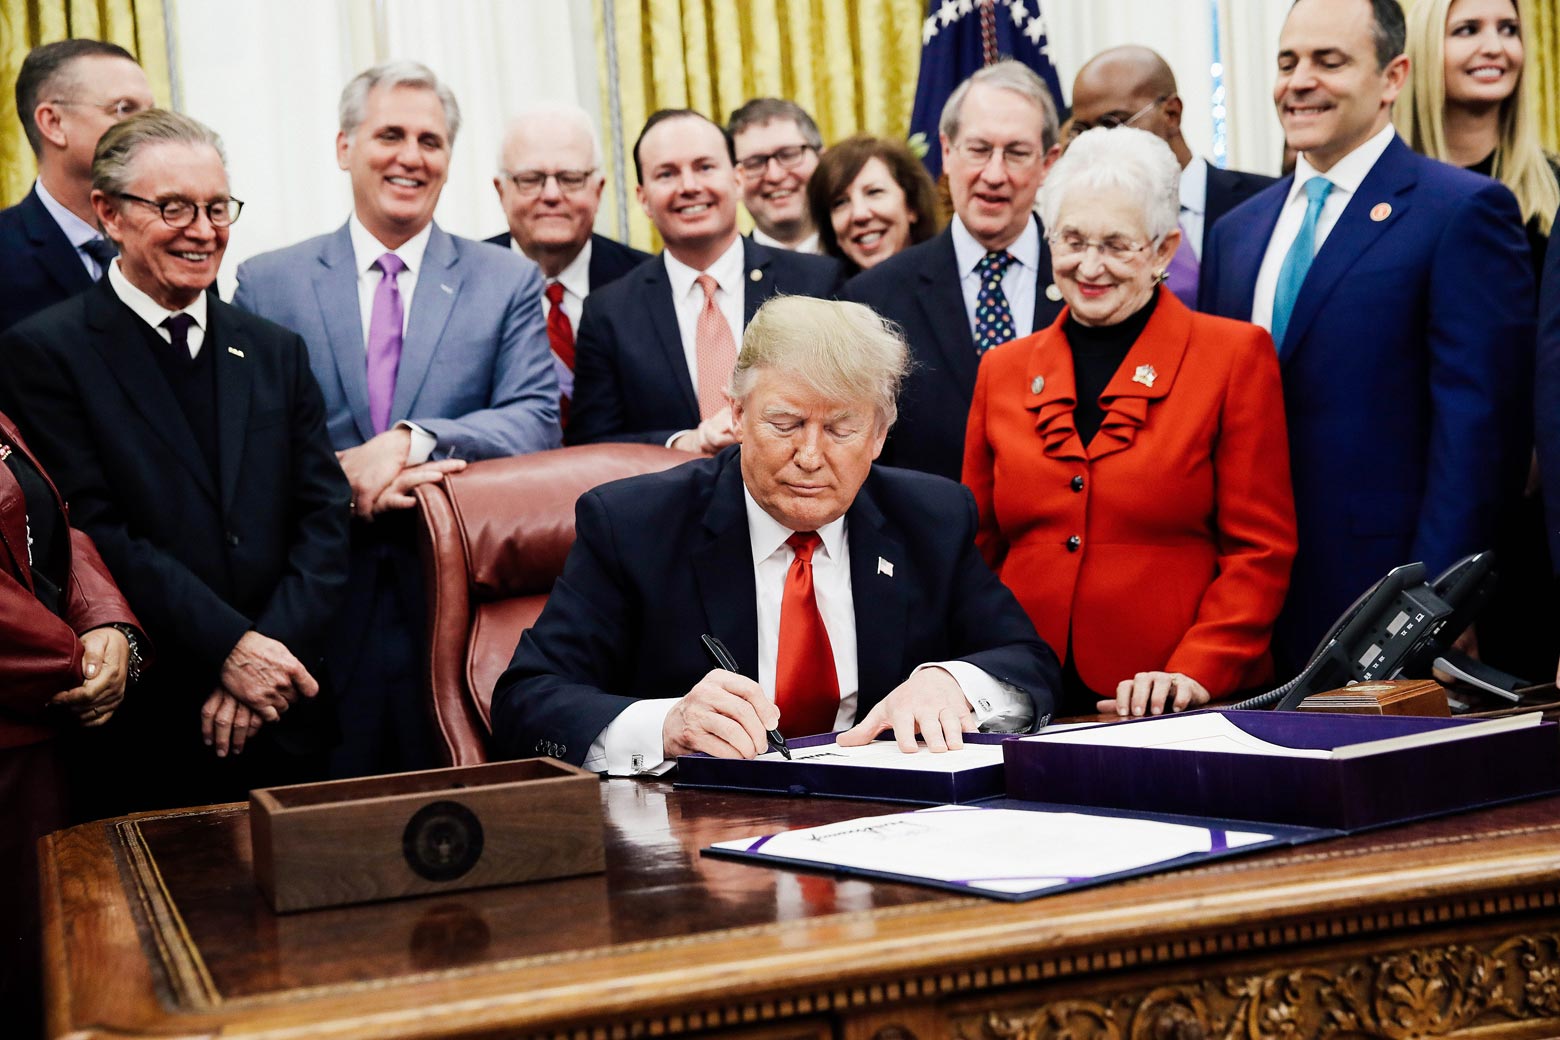 Donald Trump signs a bill on the desk in the Oval Office with people surrounding him.